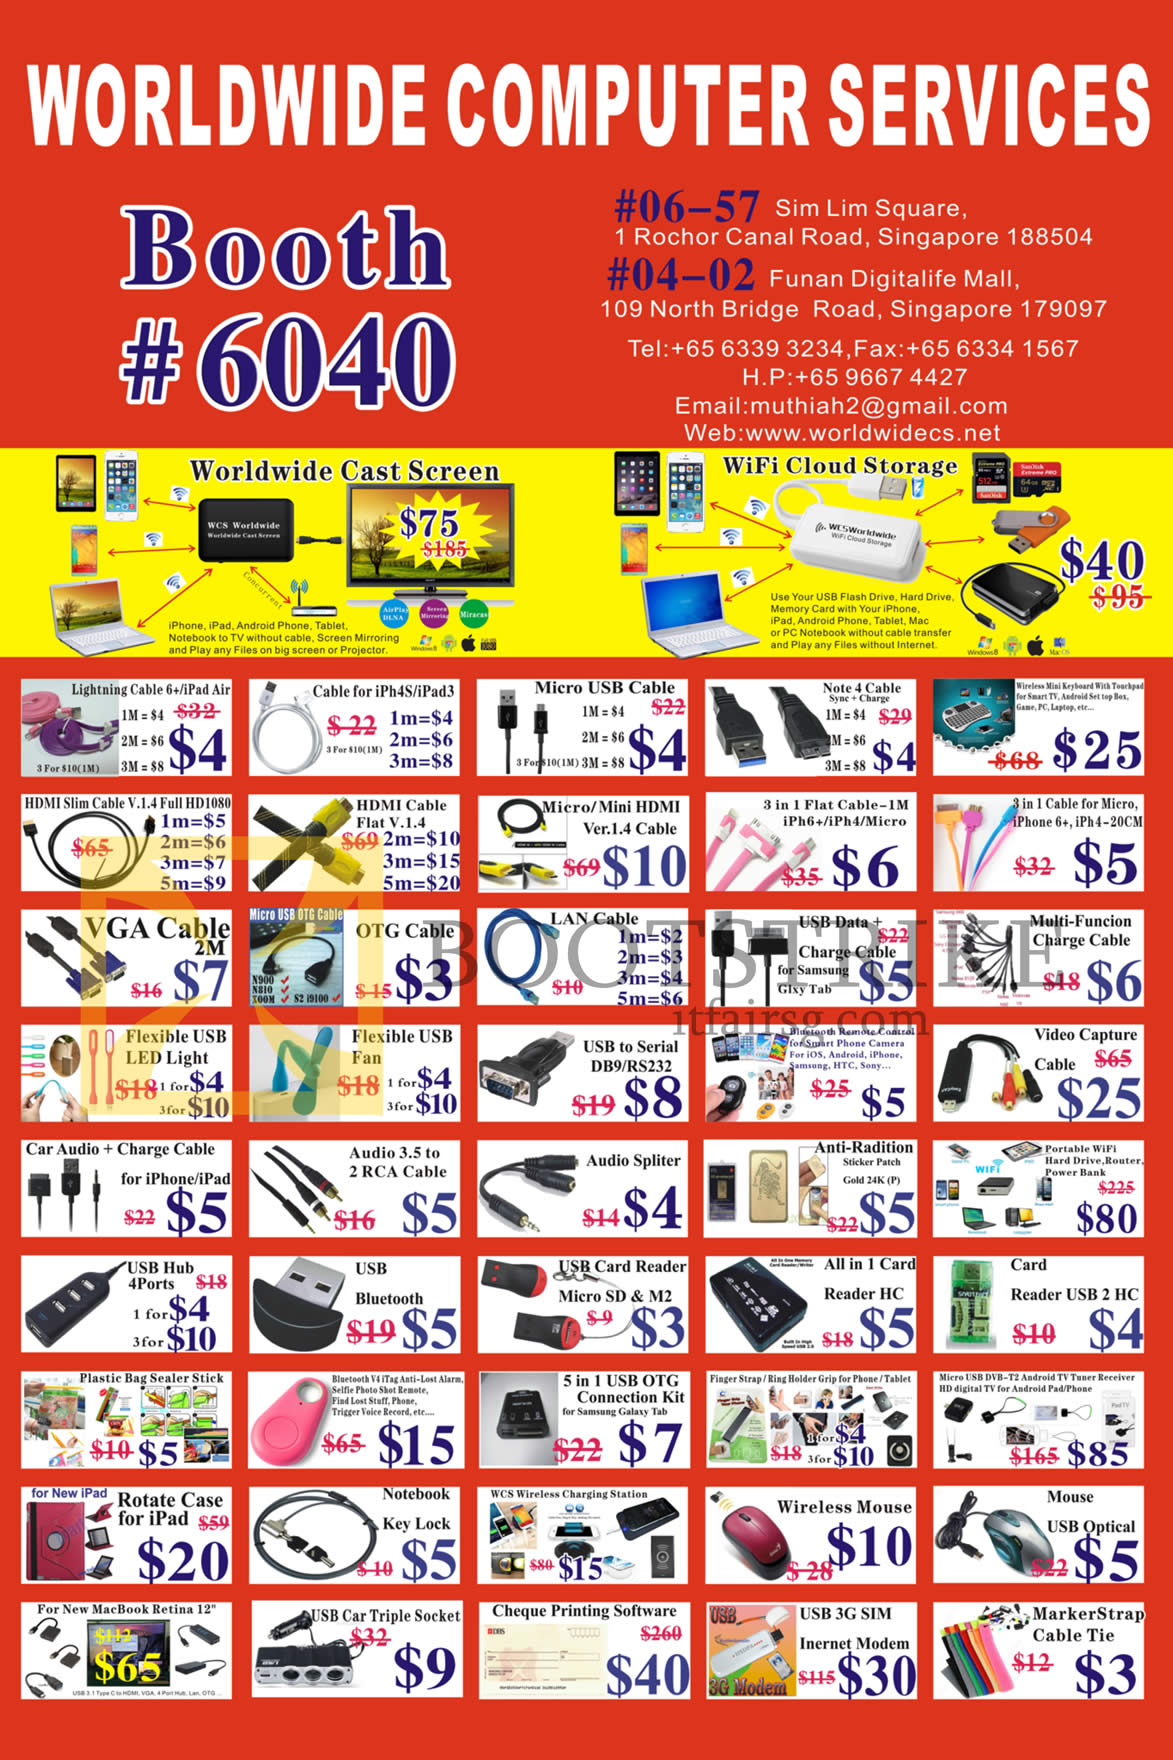 PC SHOW 2016 price list image brochure of Worldwide Computer Accessories Cable, Case, USB Hub, Card Reader, LED Light, Mouse, Bag Sealer Stick